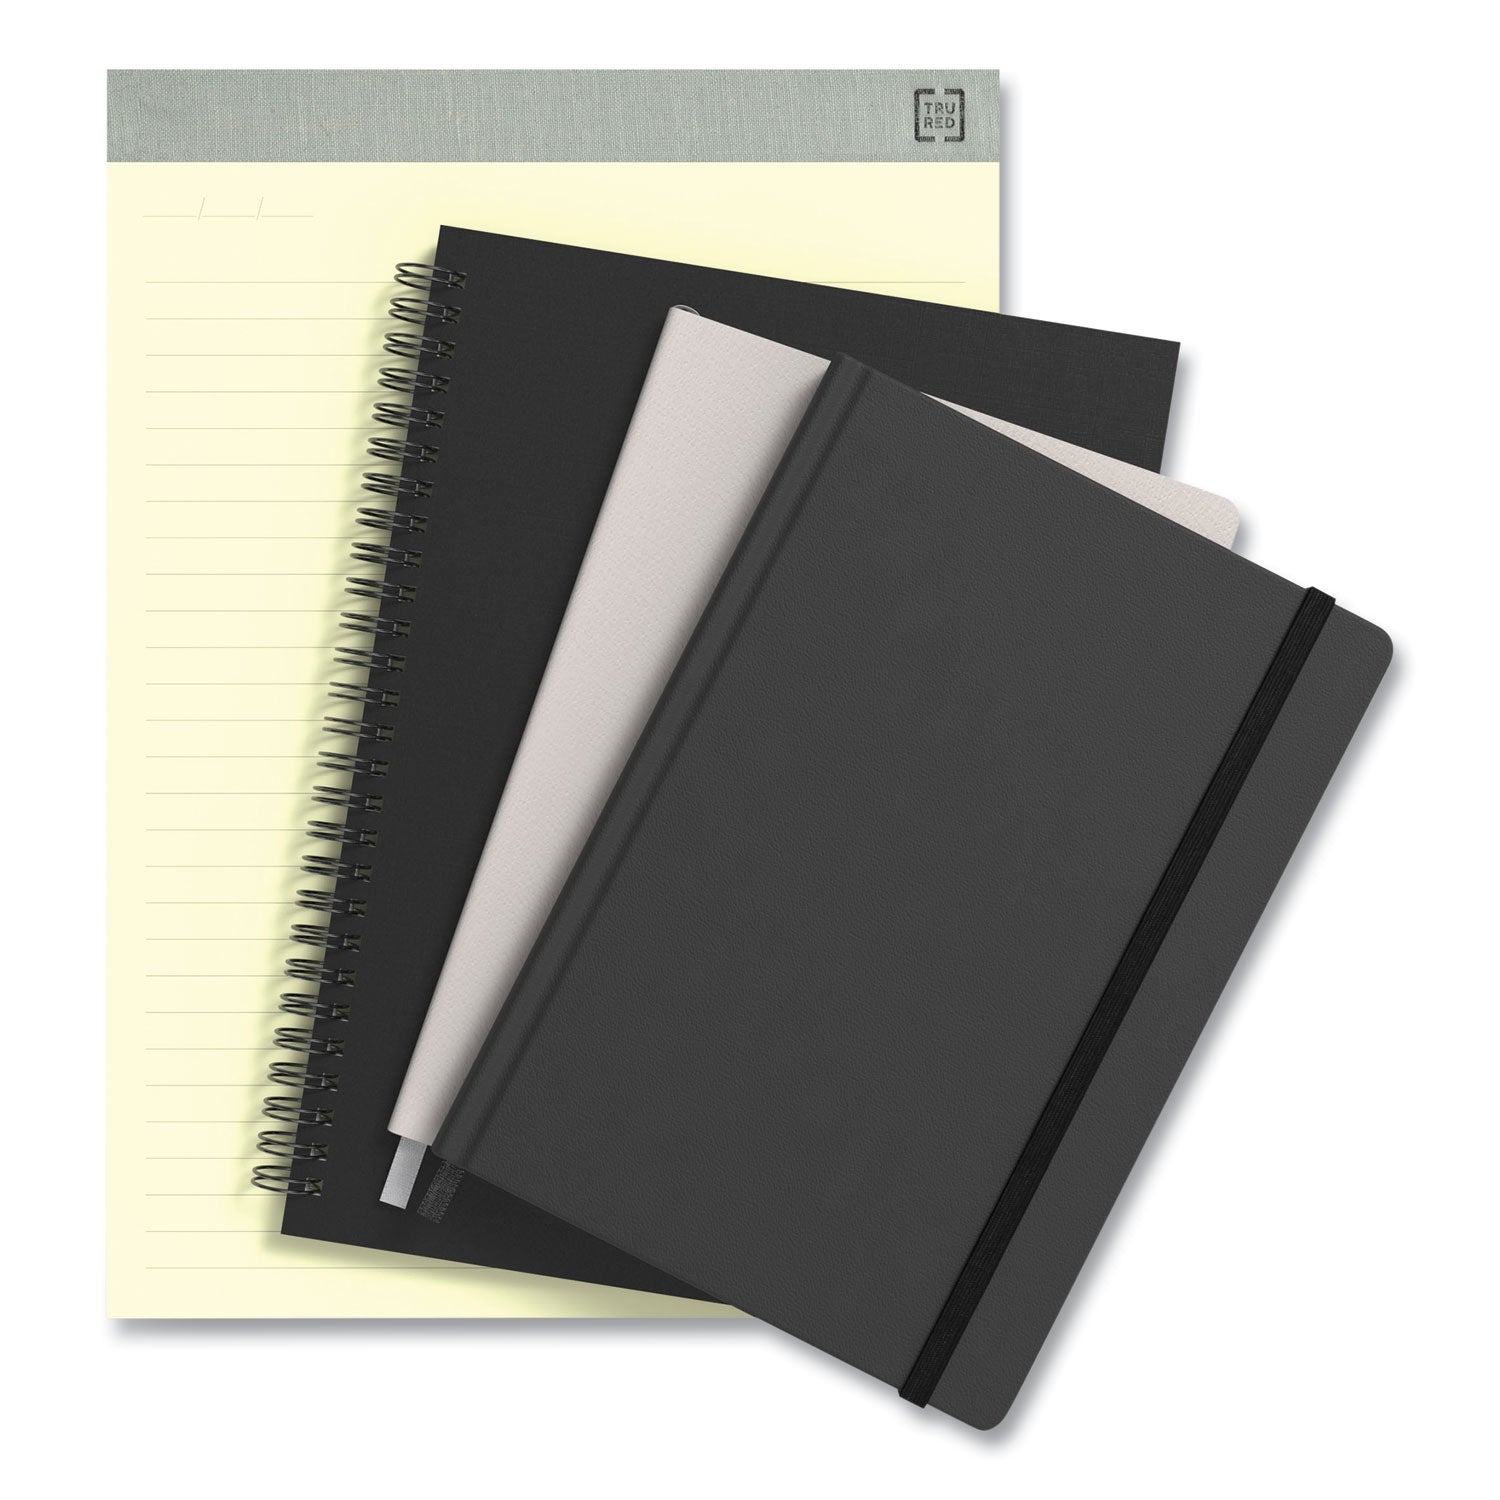 soft-cover-notebook-folio-set-1-subject-narrow-rule-black-cover-80-11-x-85-sheets_tud24377280 - 6